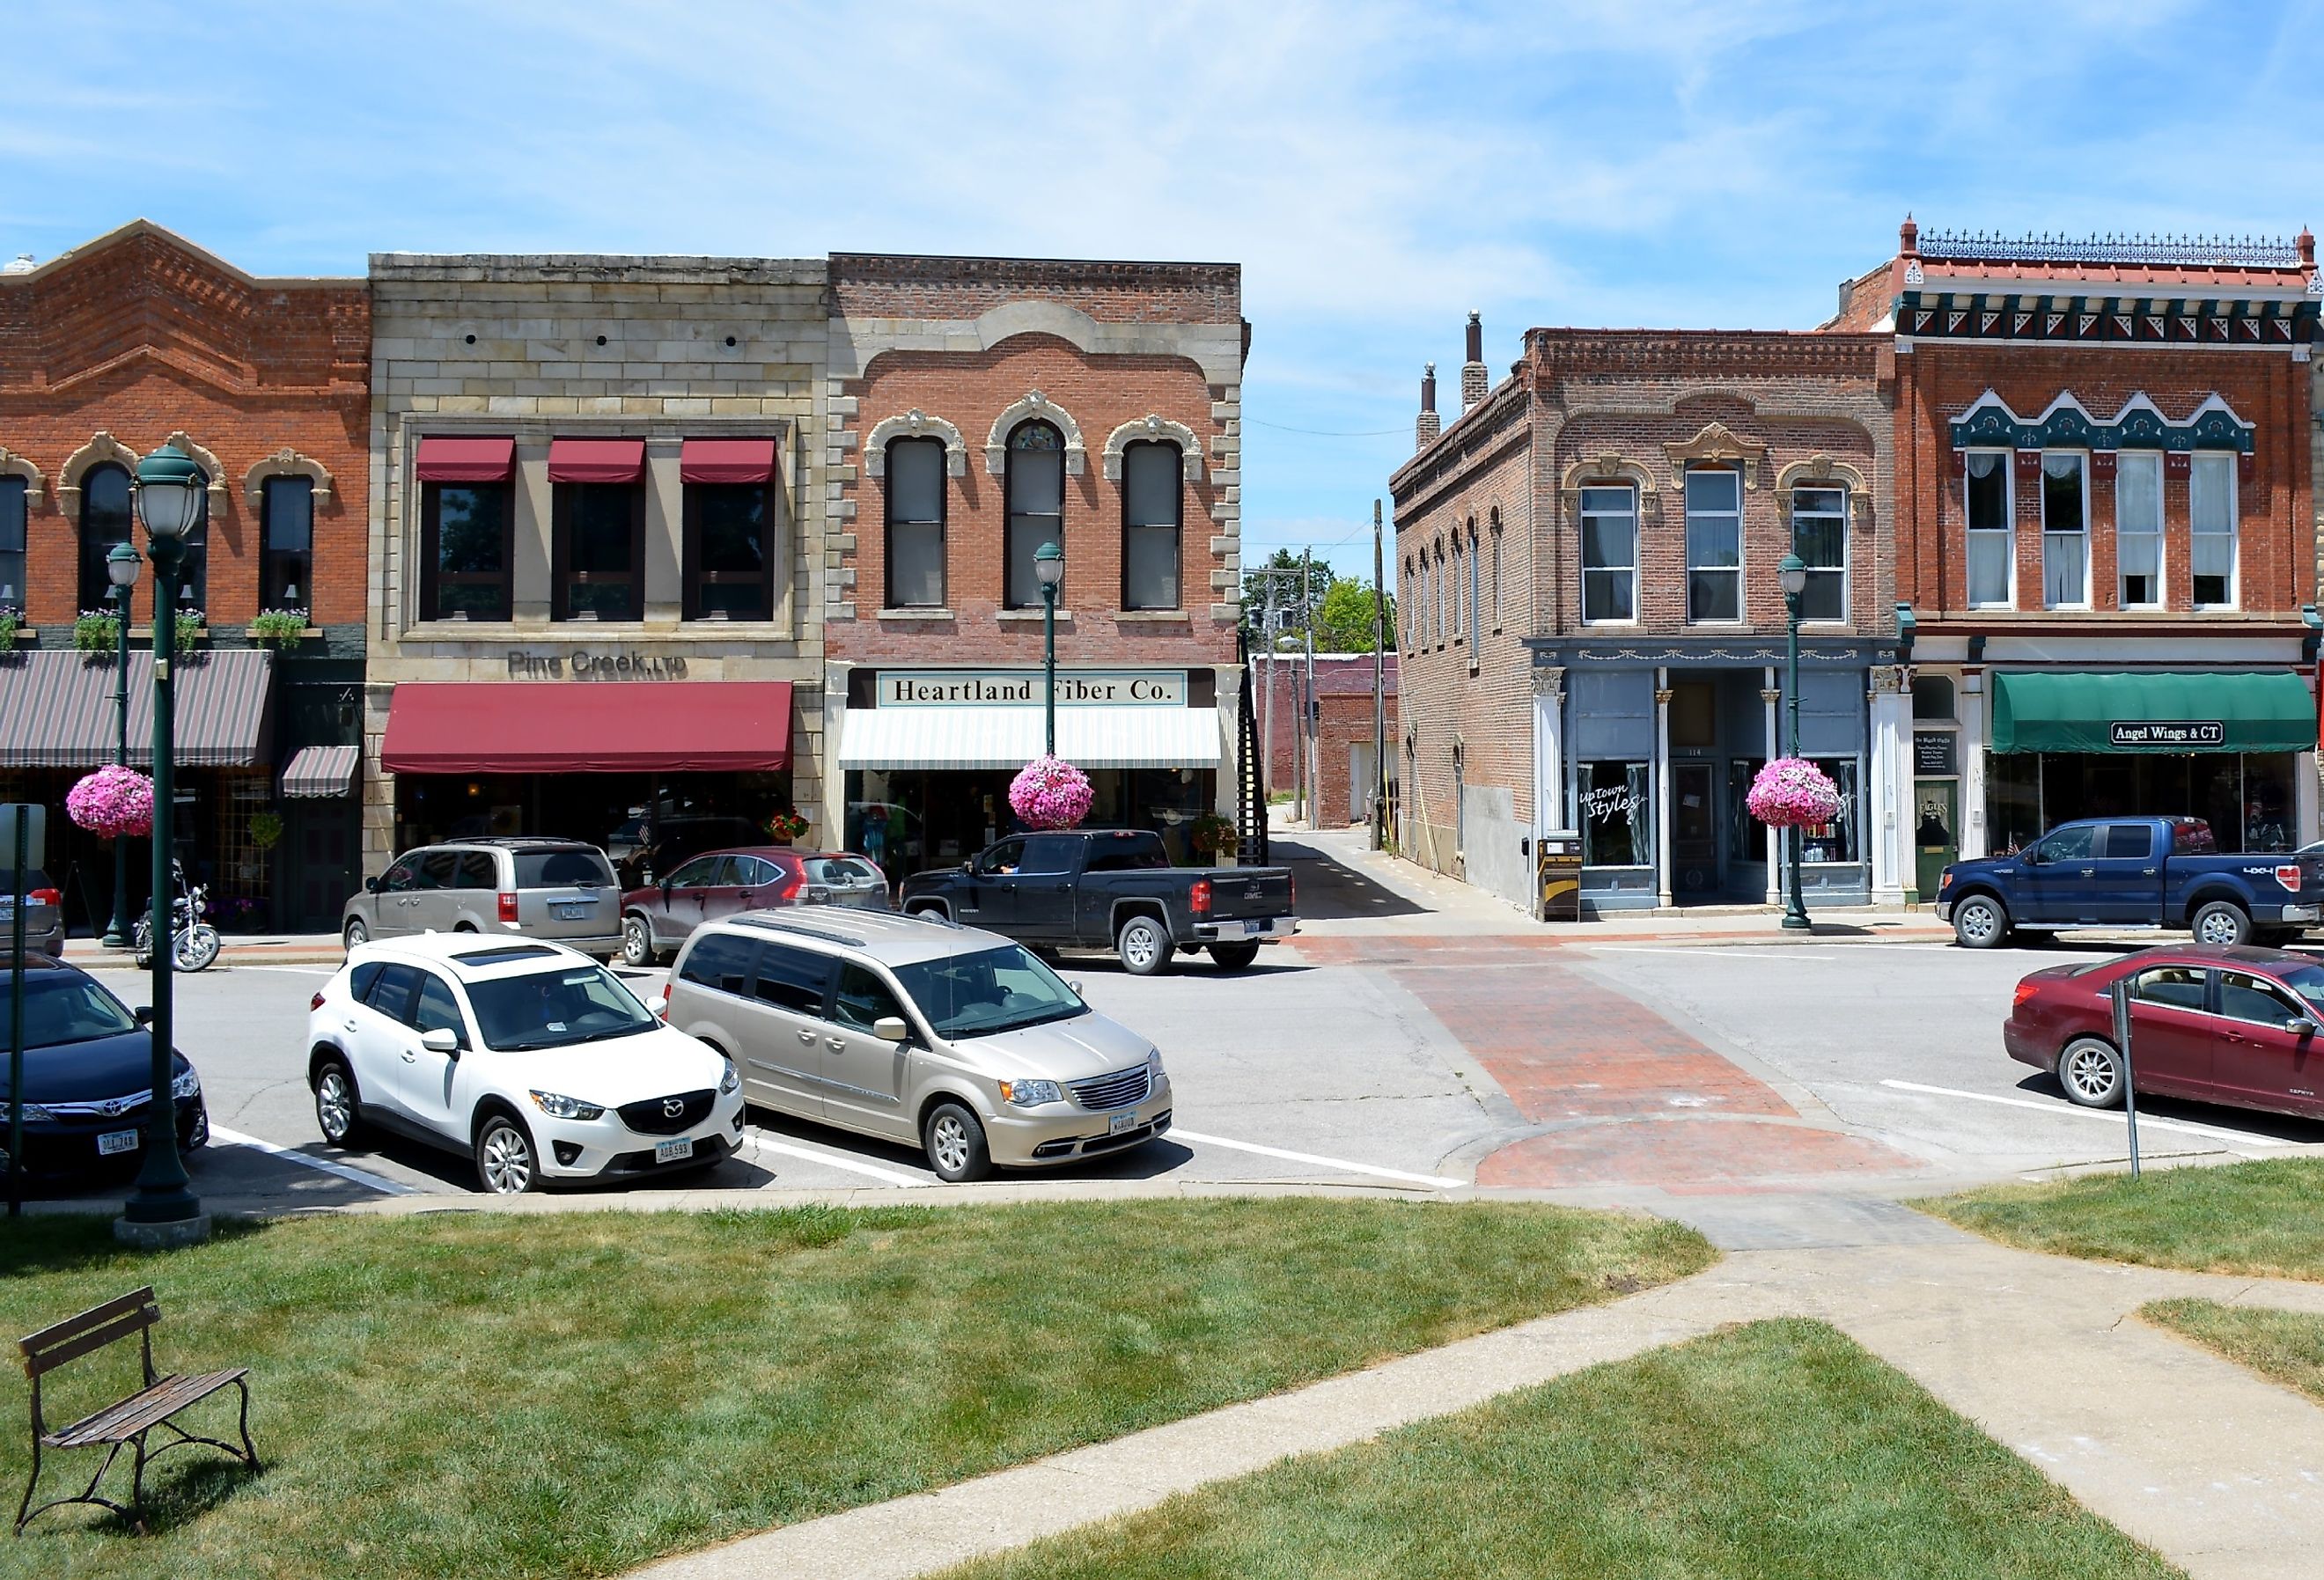 Downtown Winterset, Iowa from the courthouse square. Image credit dustin77a via Shutterstock